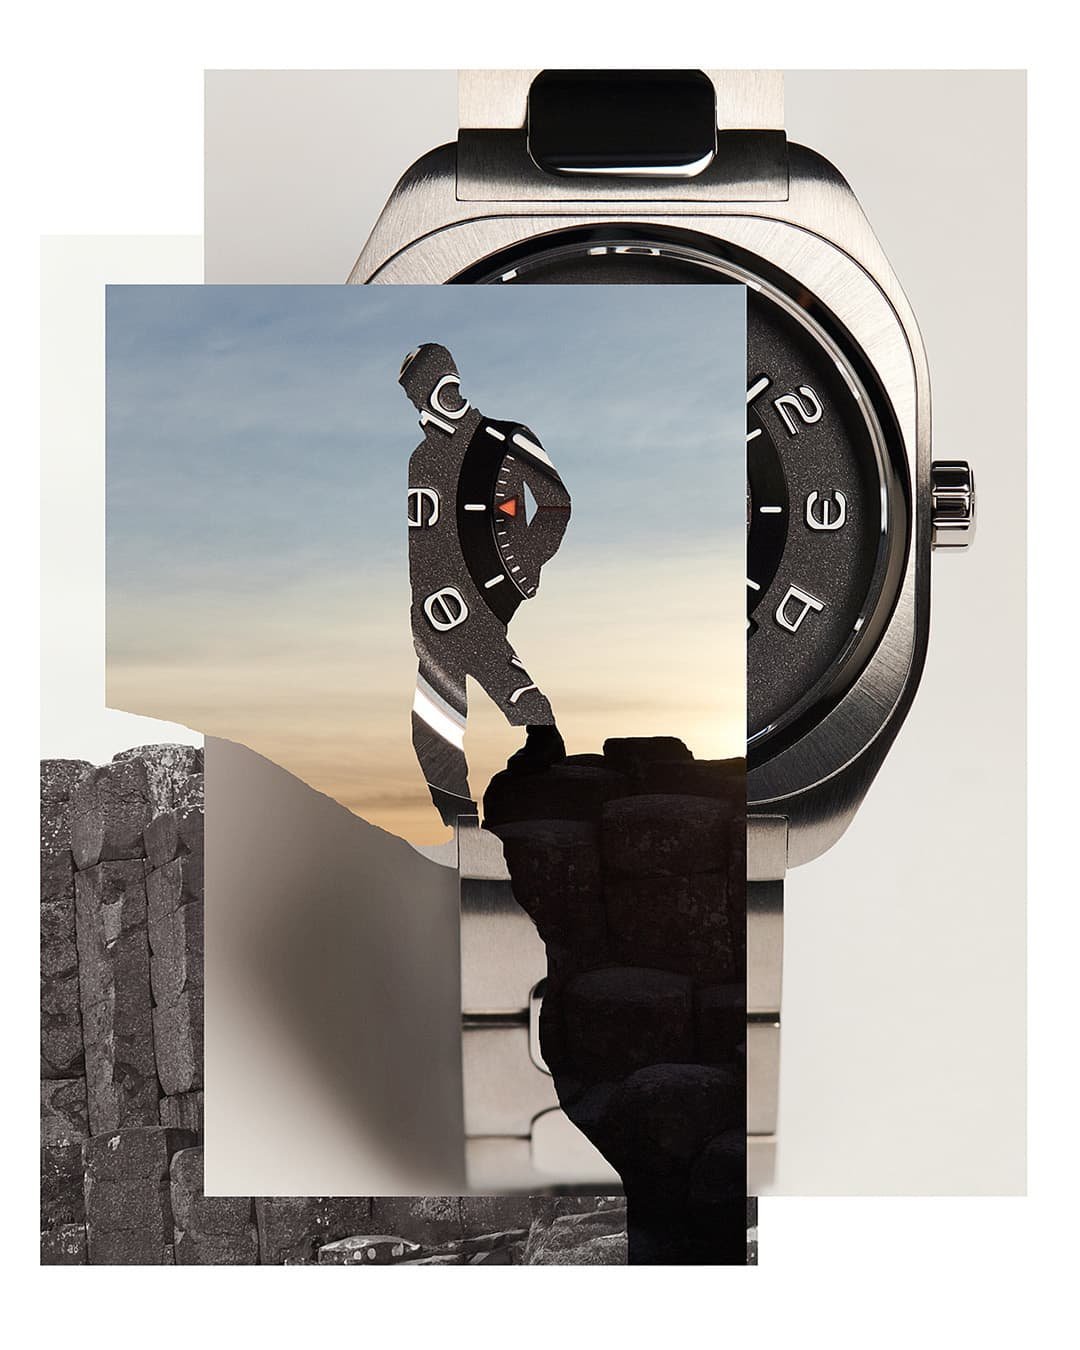 hermes-H08-watch-2021-ad-campaign-the-impression-015.jpg